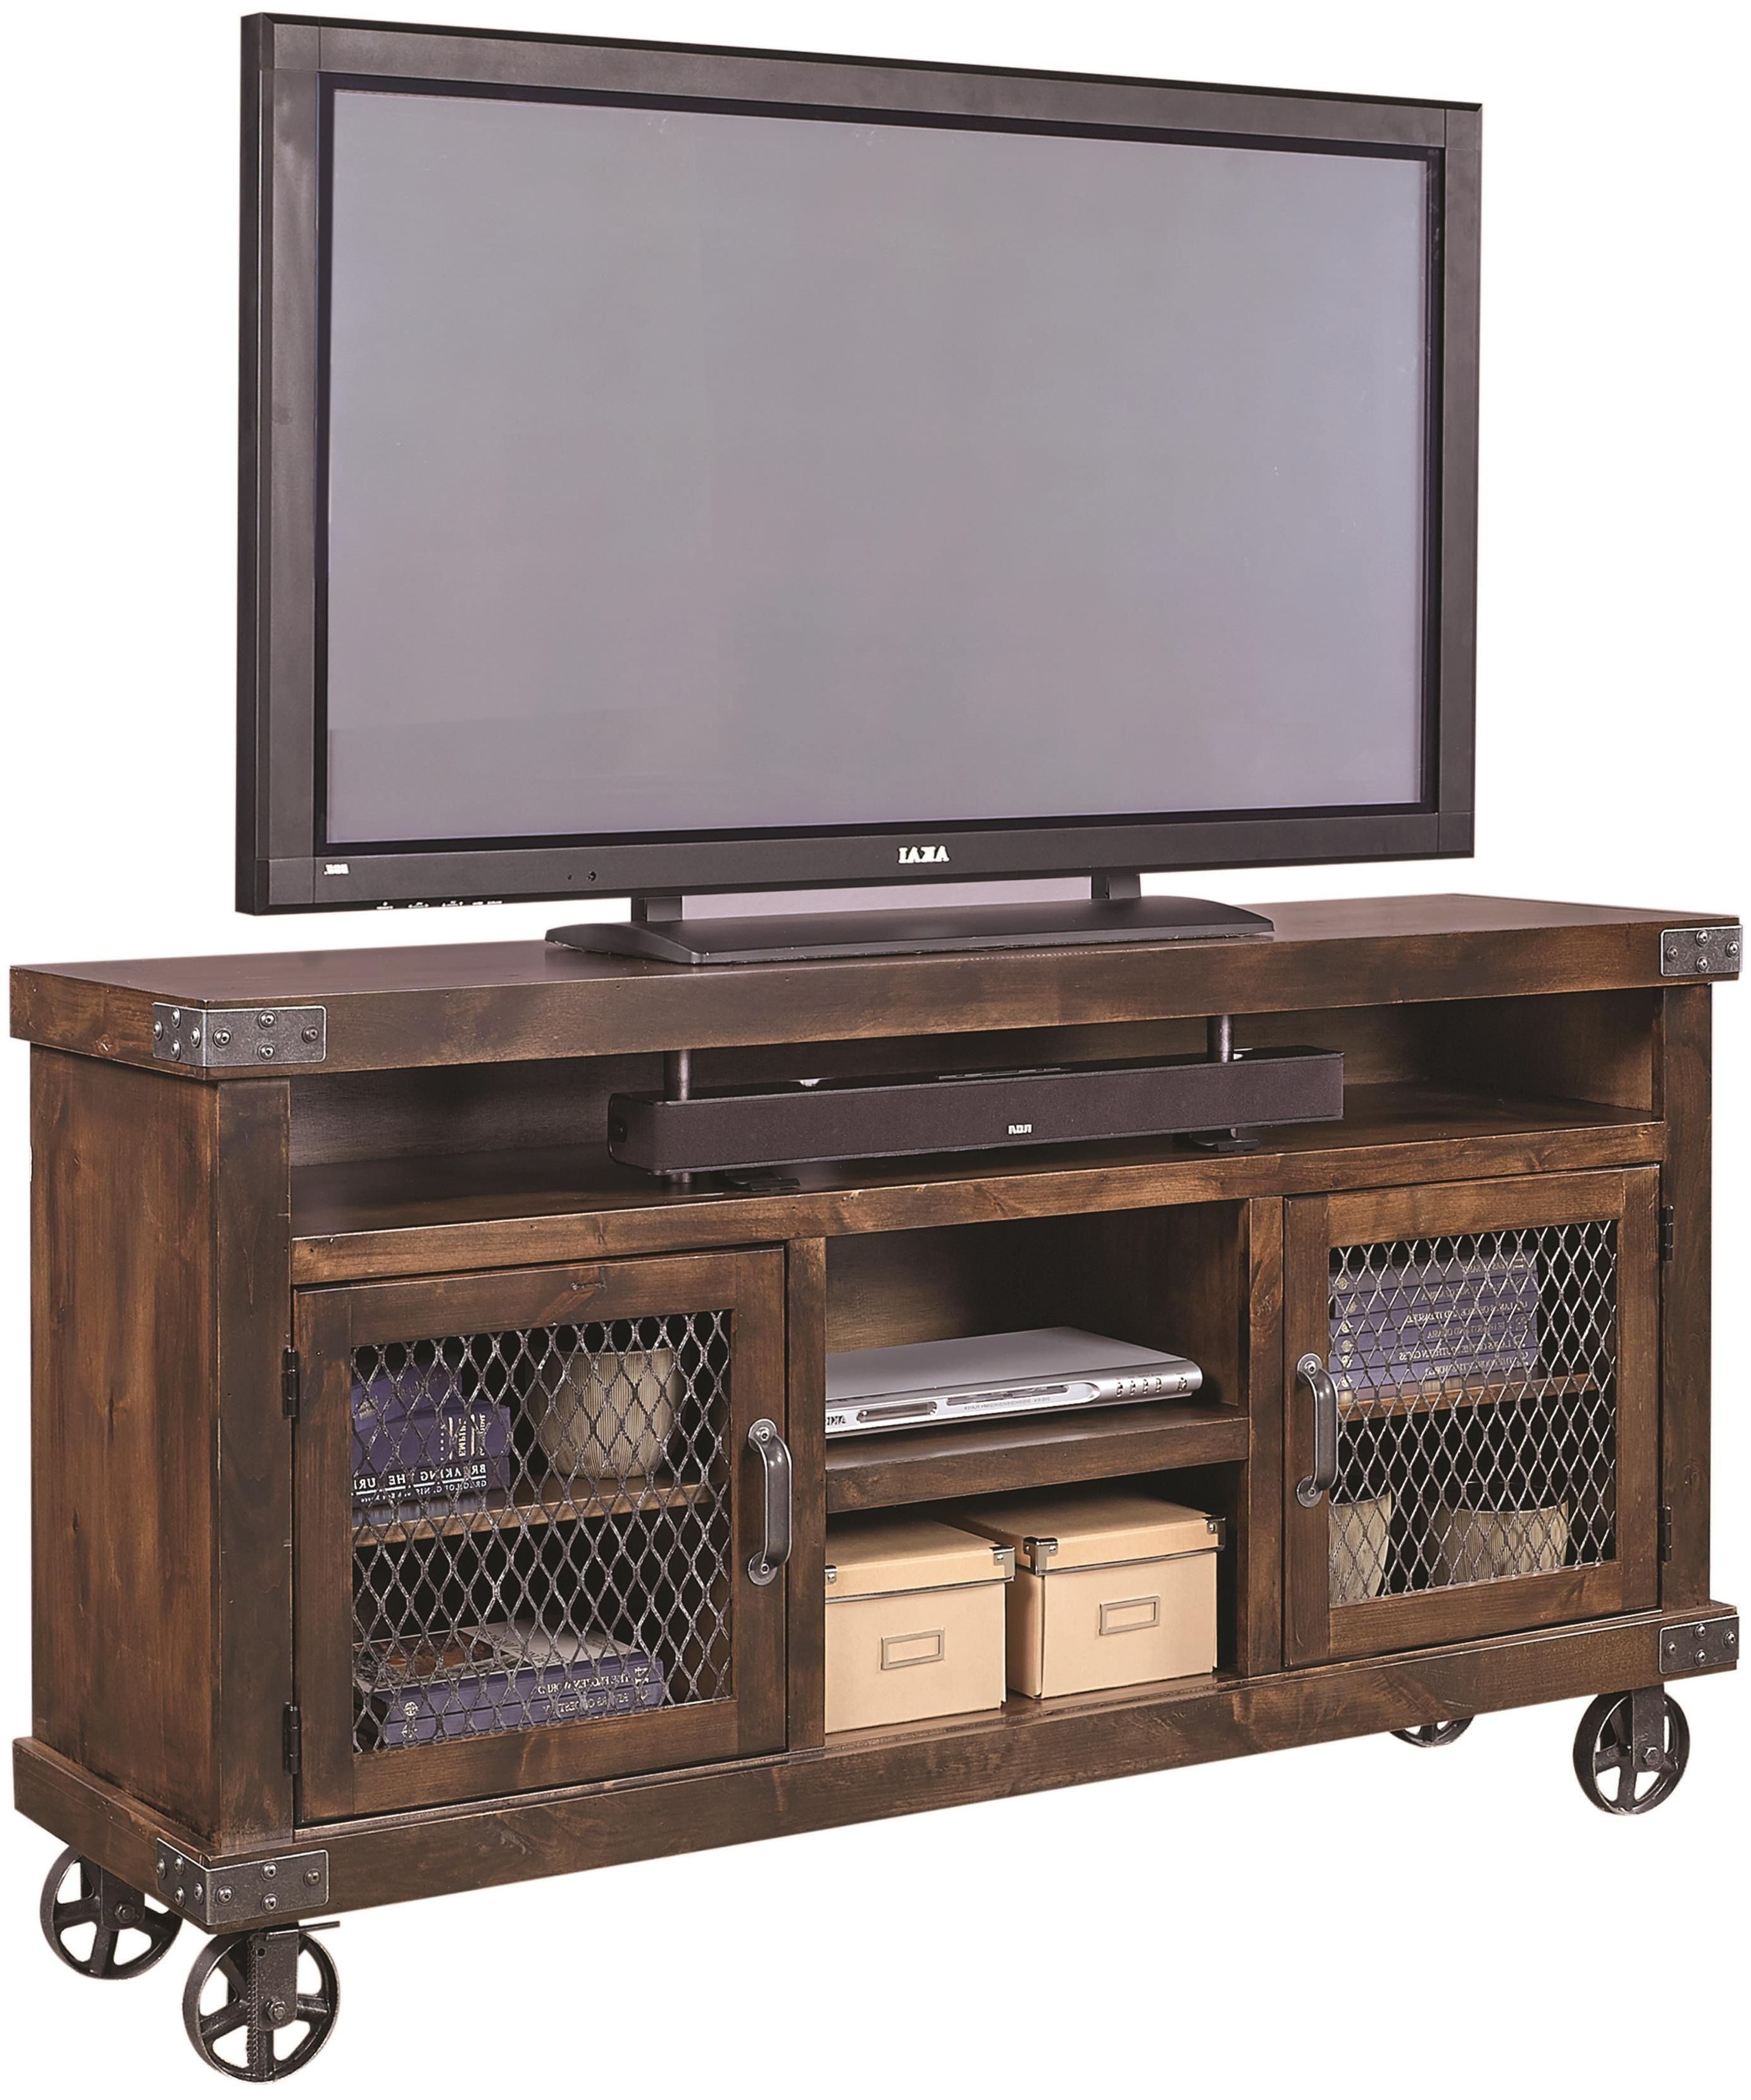 Most Recent Metal Corner Tv Stand Industrial 65 Console With Casters Inside Industrial Corner Tv Stands (View 12 of 20)